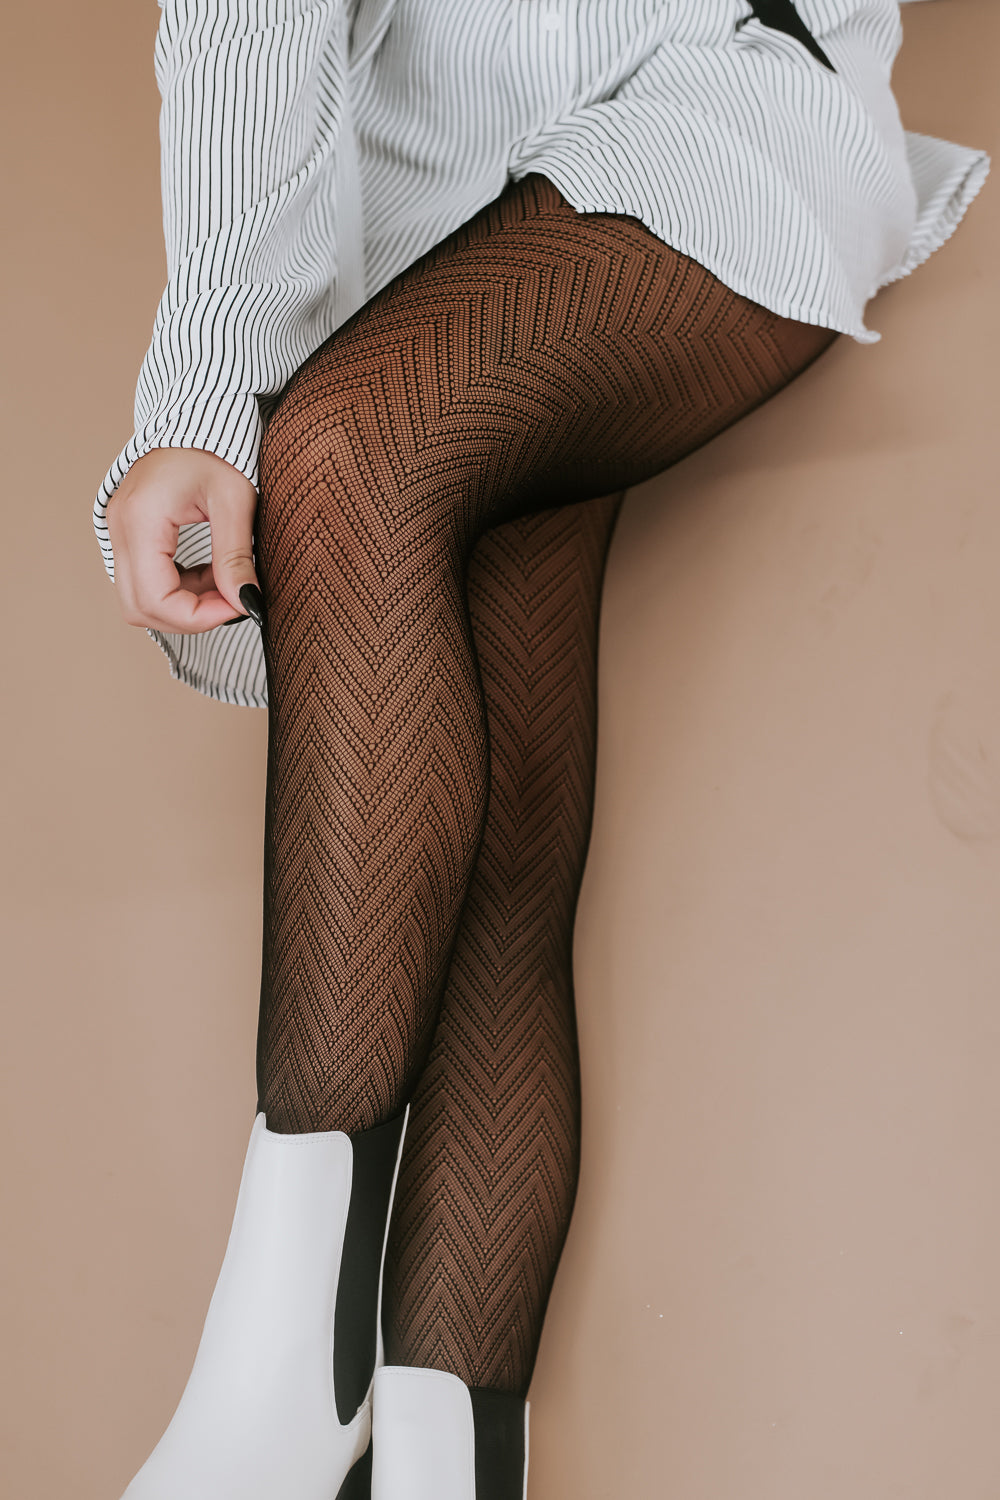 Tights for Every Body [Snag Tights]